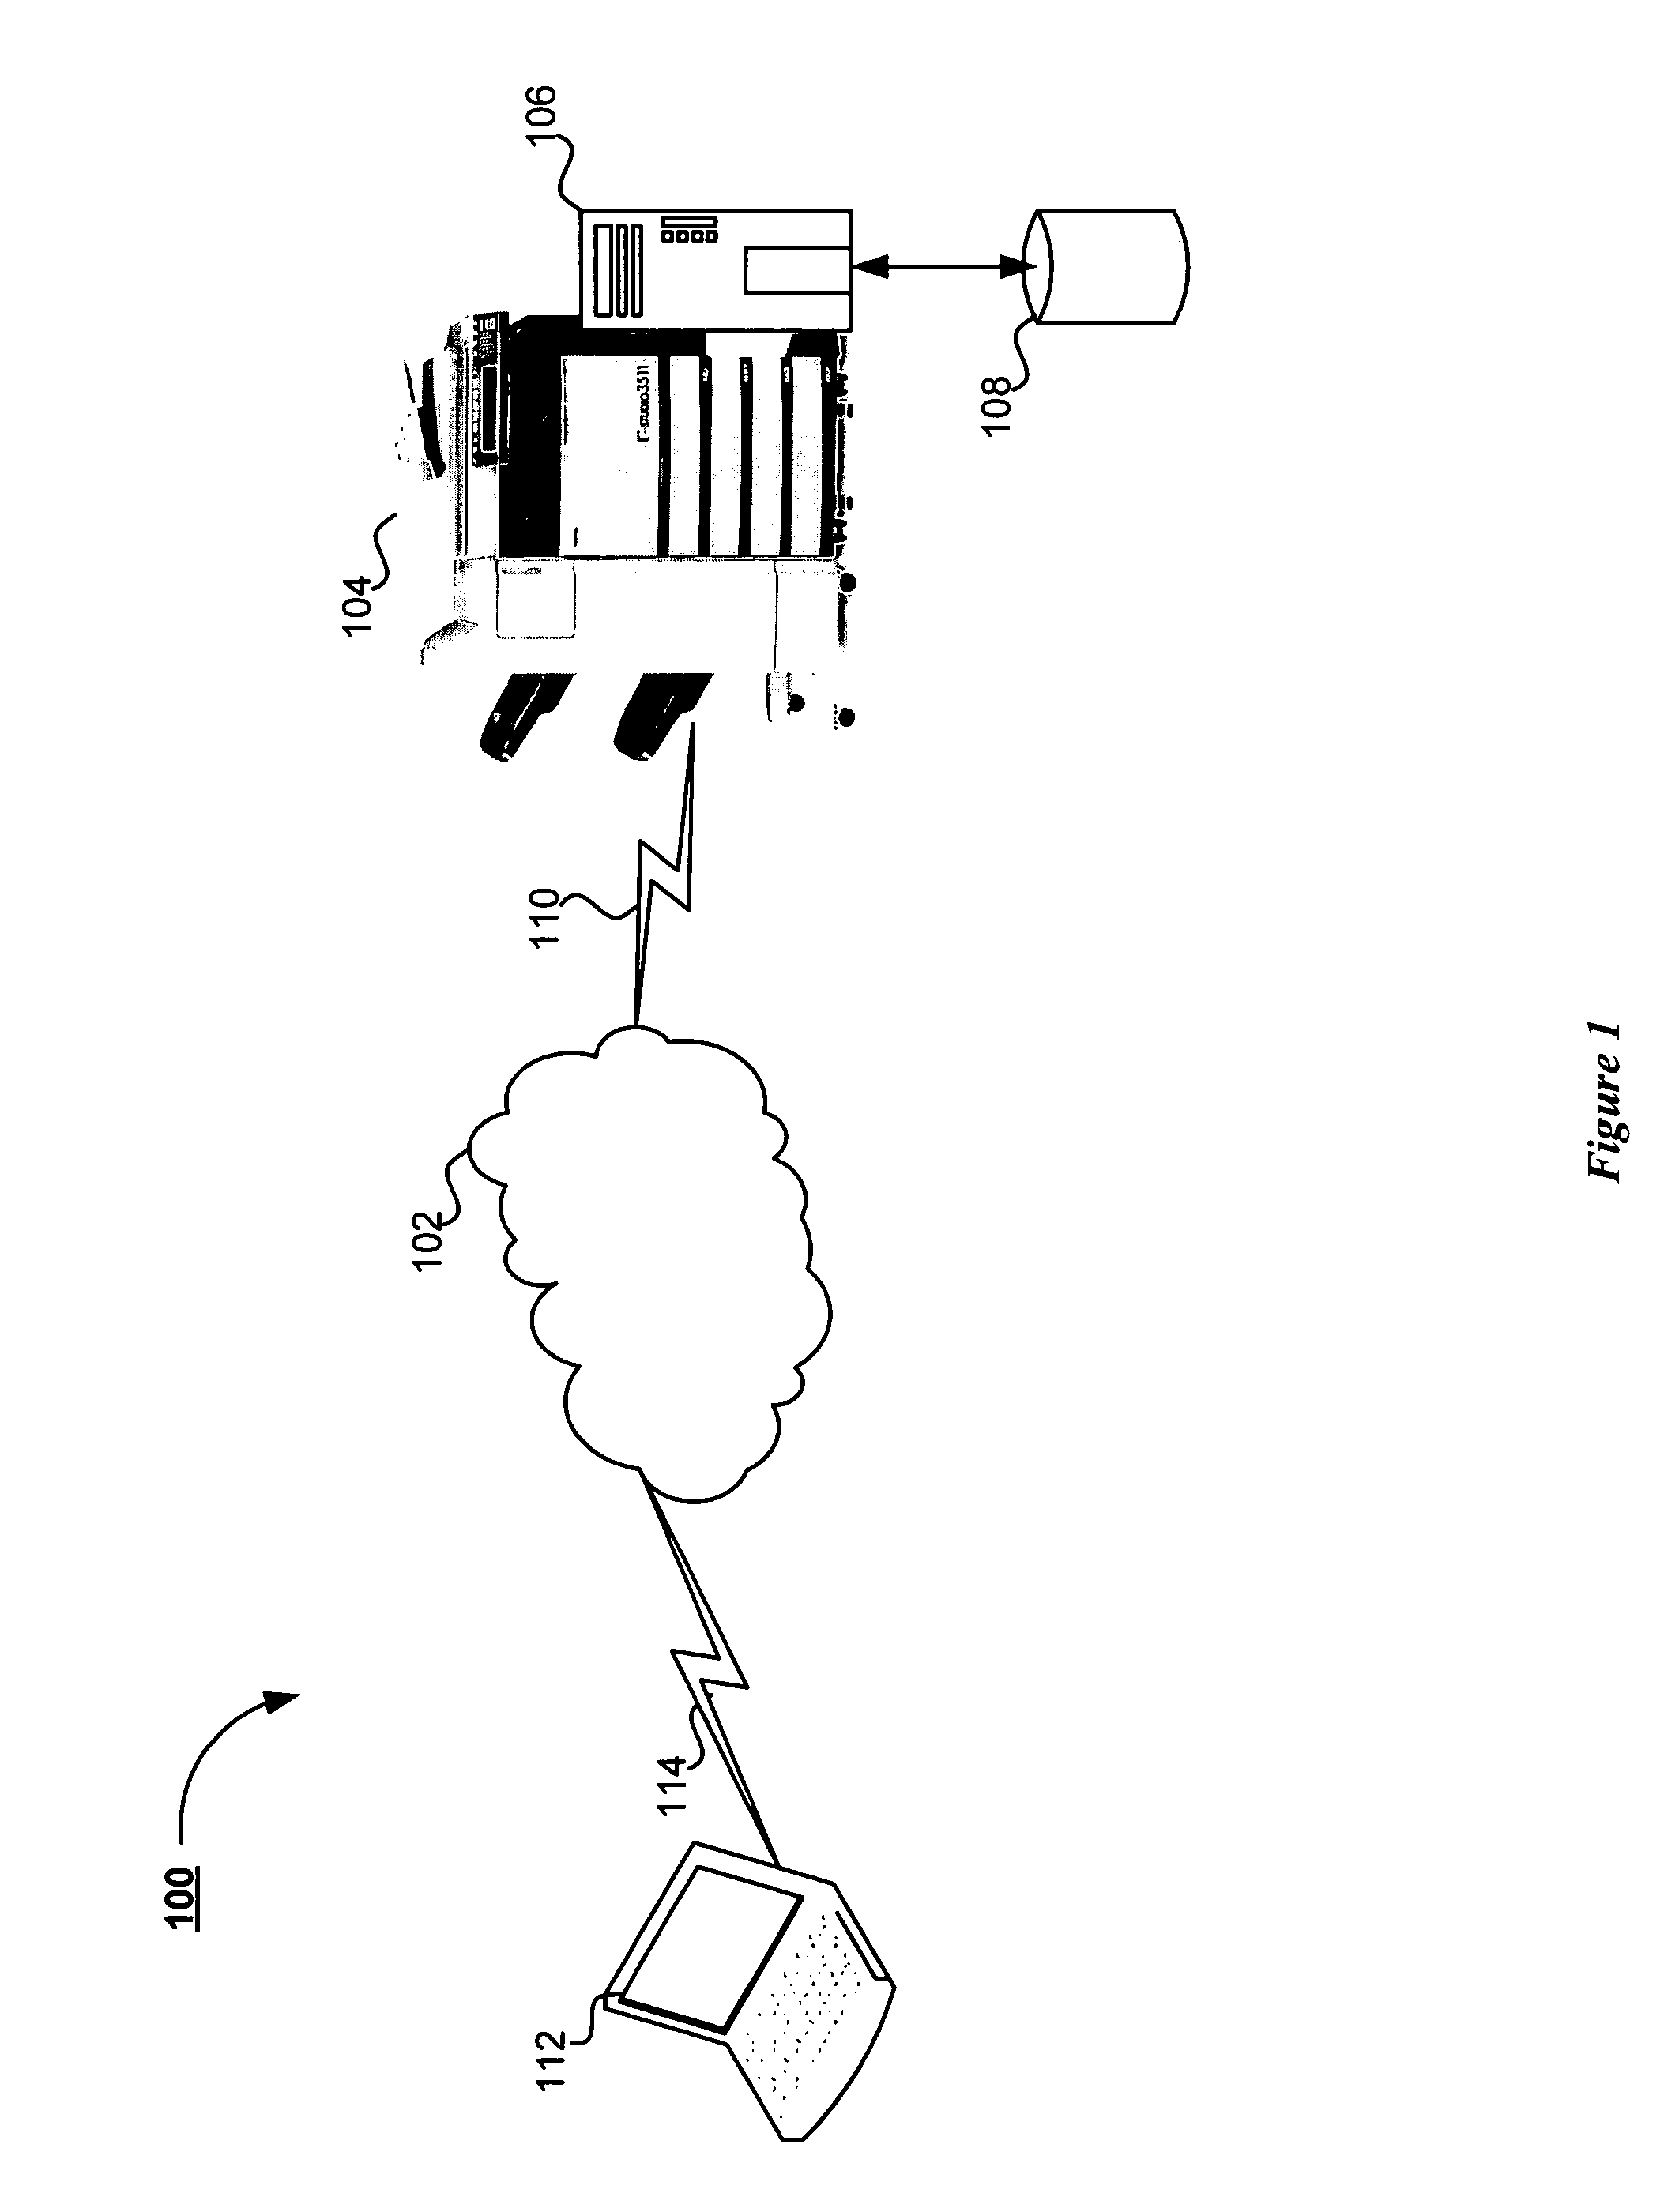 System and method for secure inter-process data communication